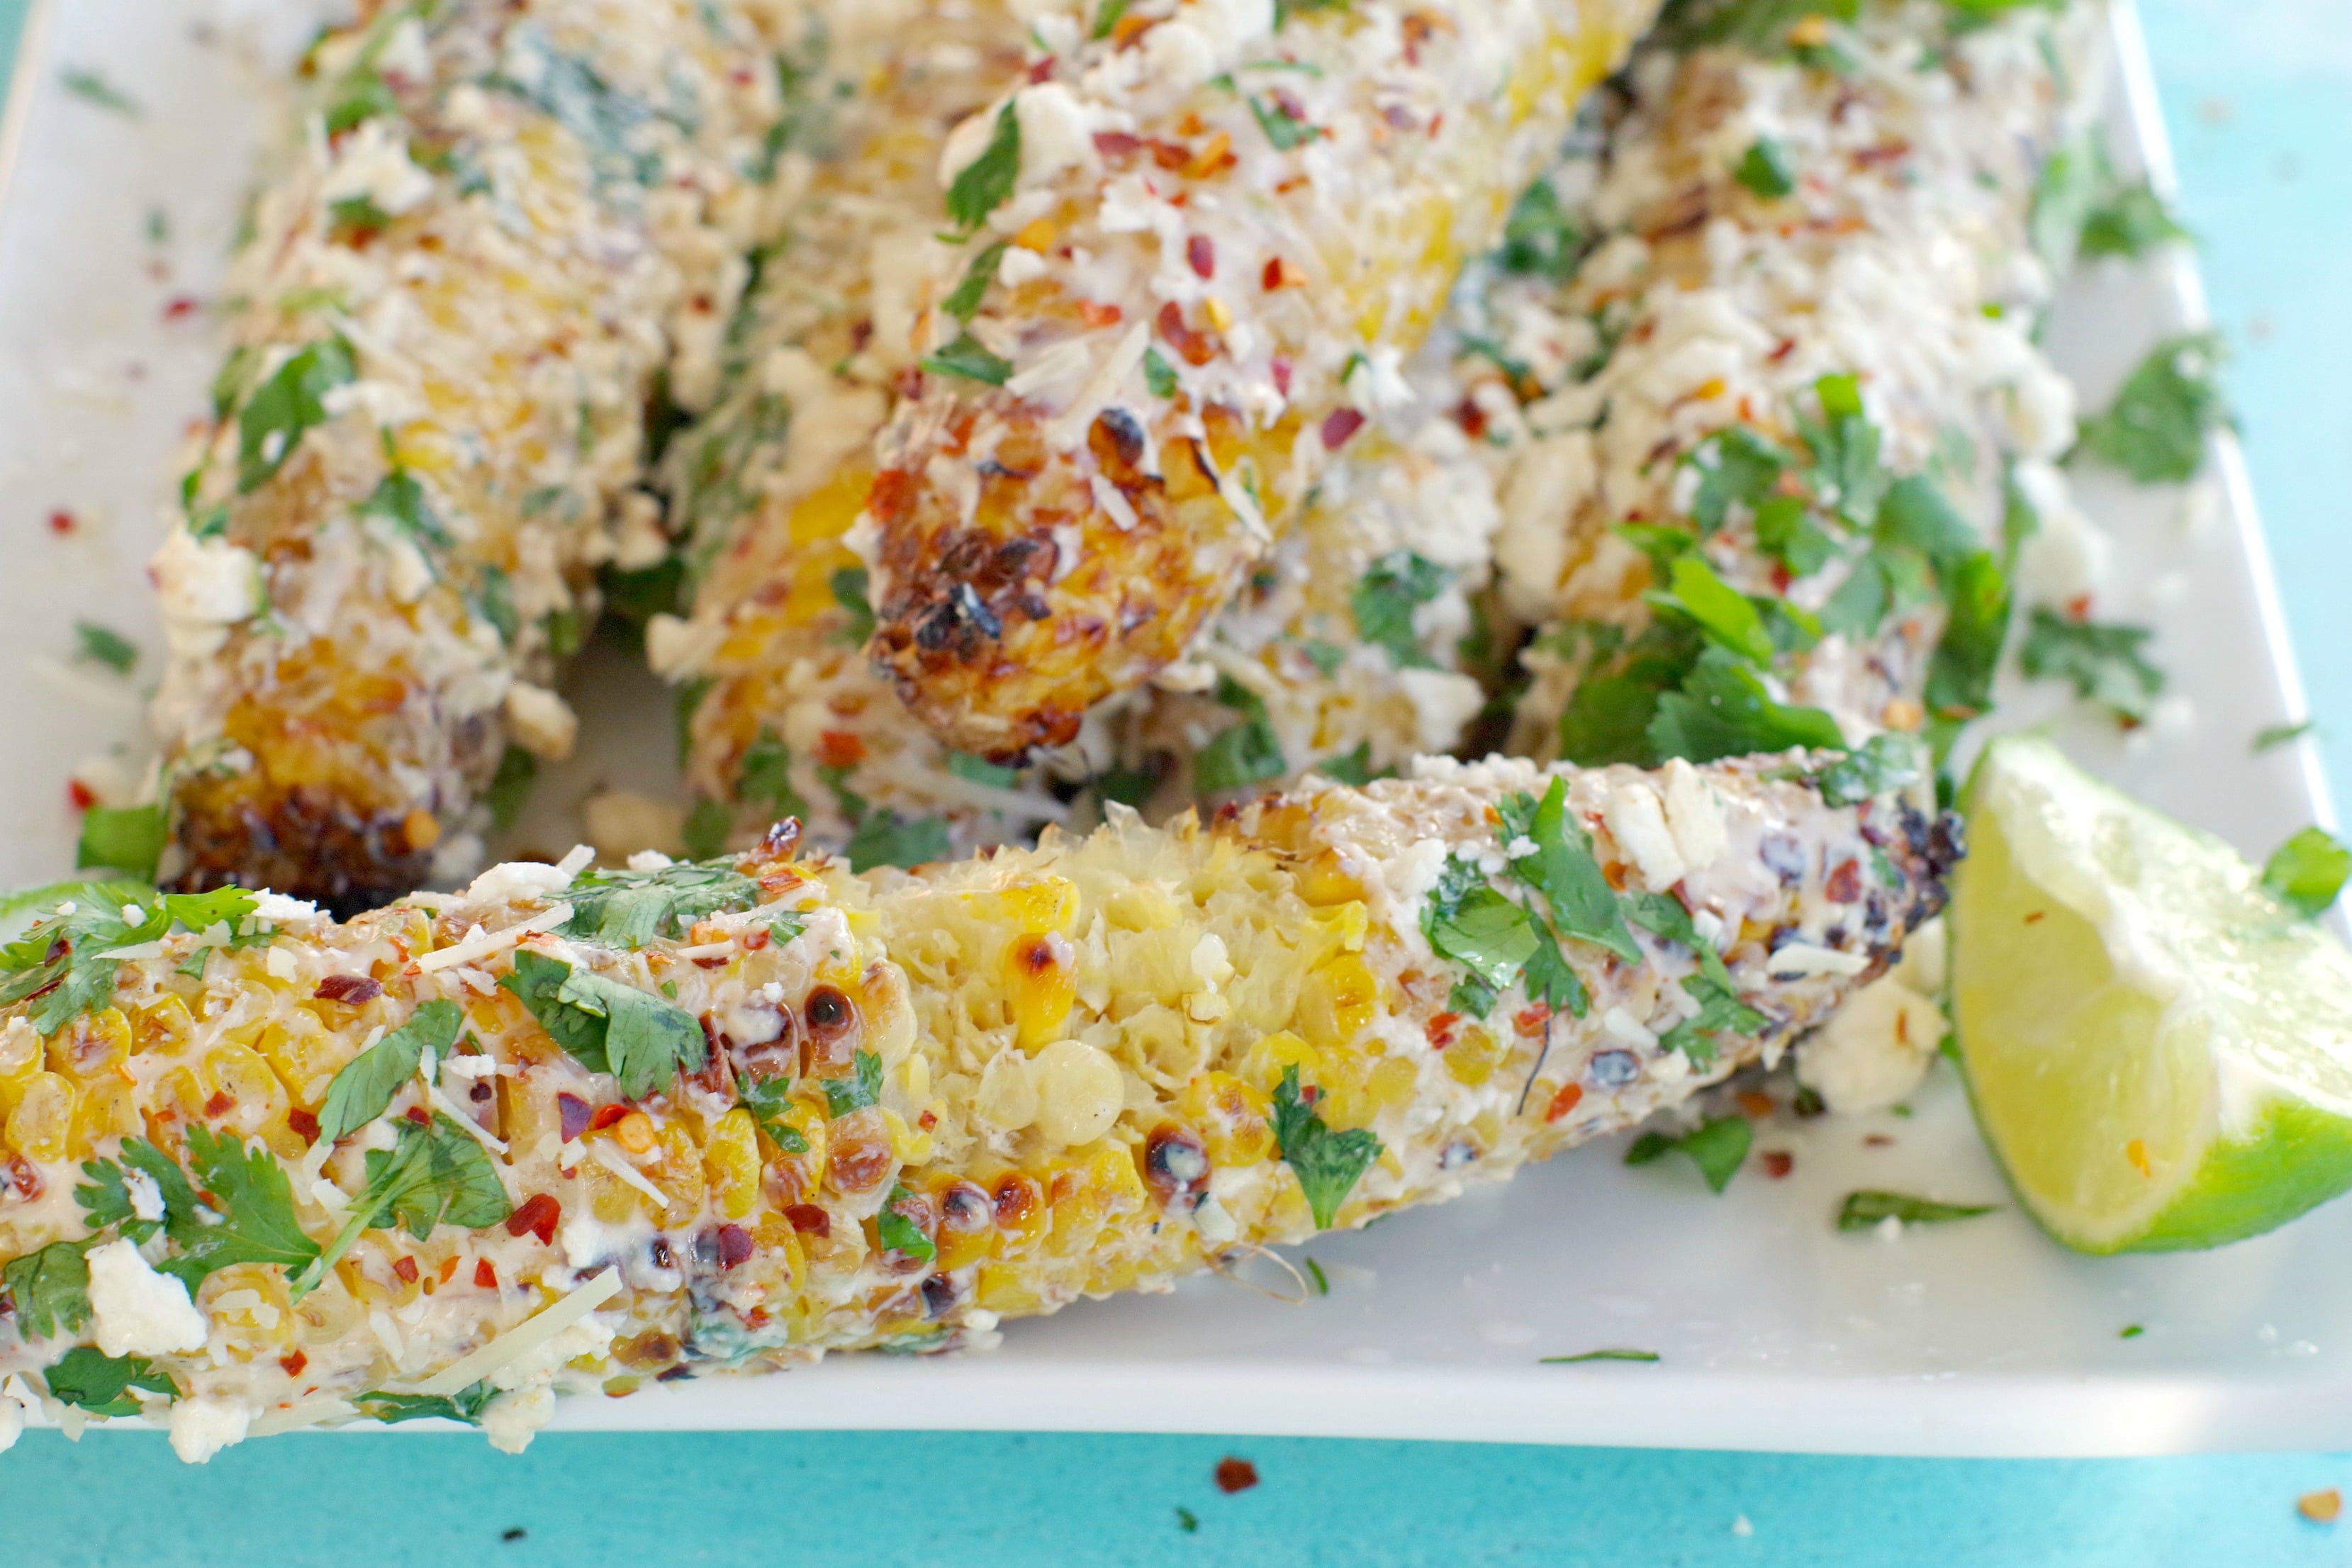 Mexican grilled corn with bites taken out of it